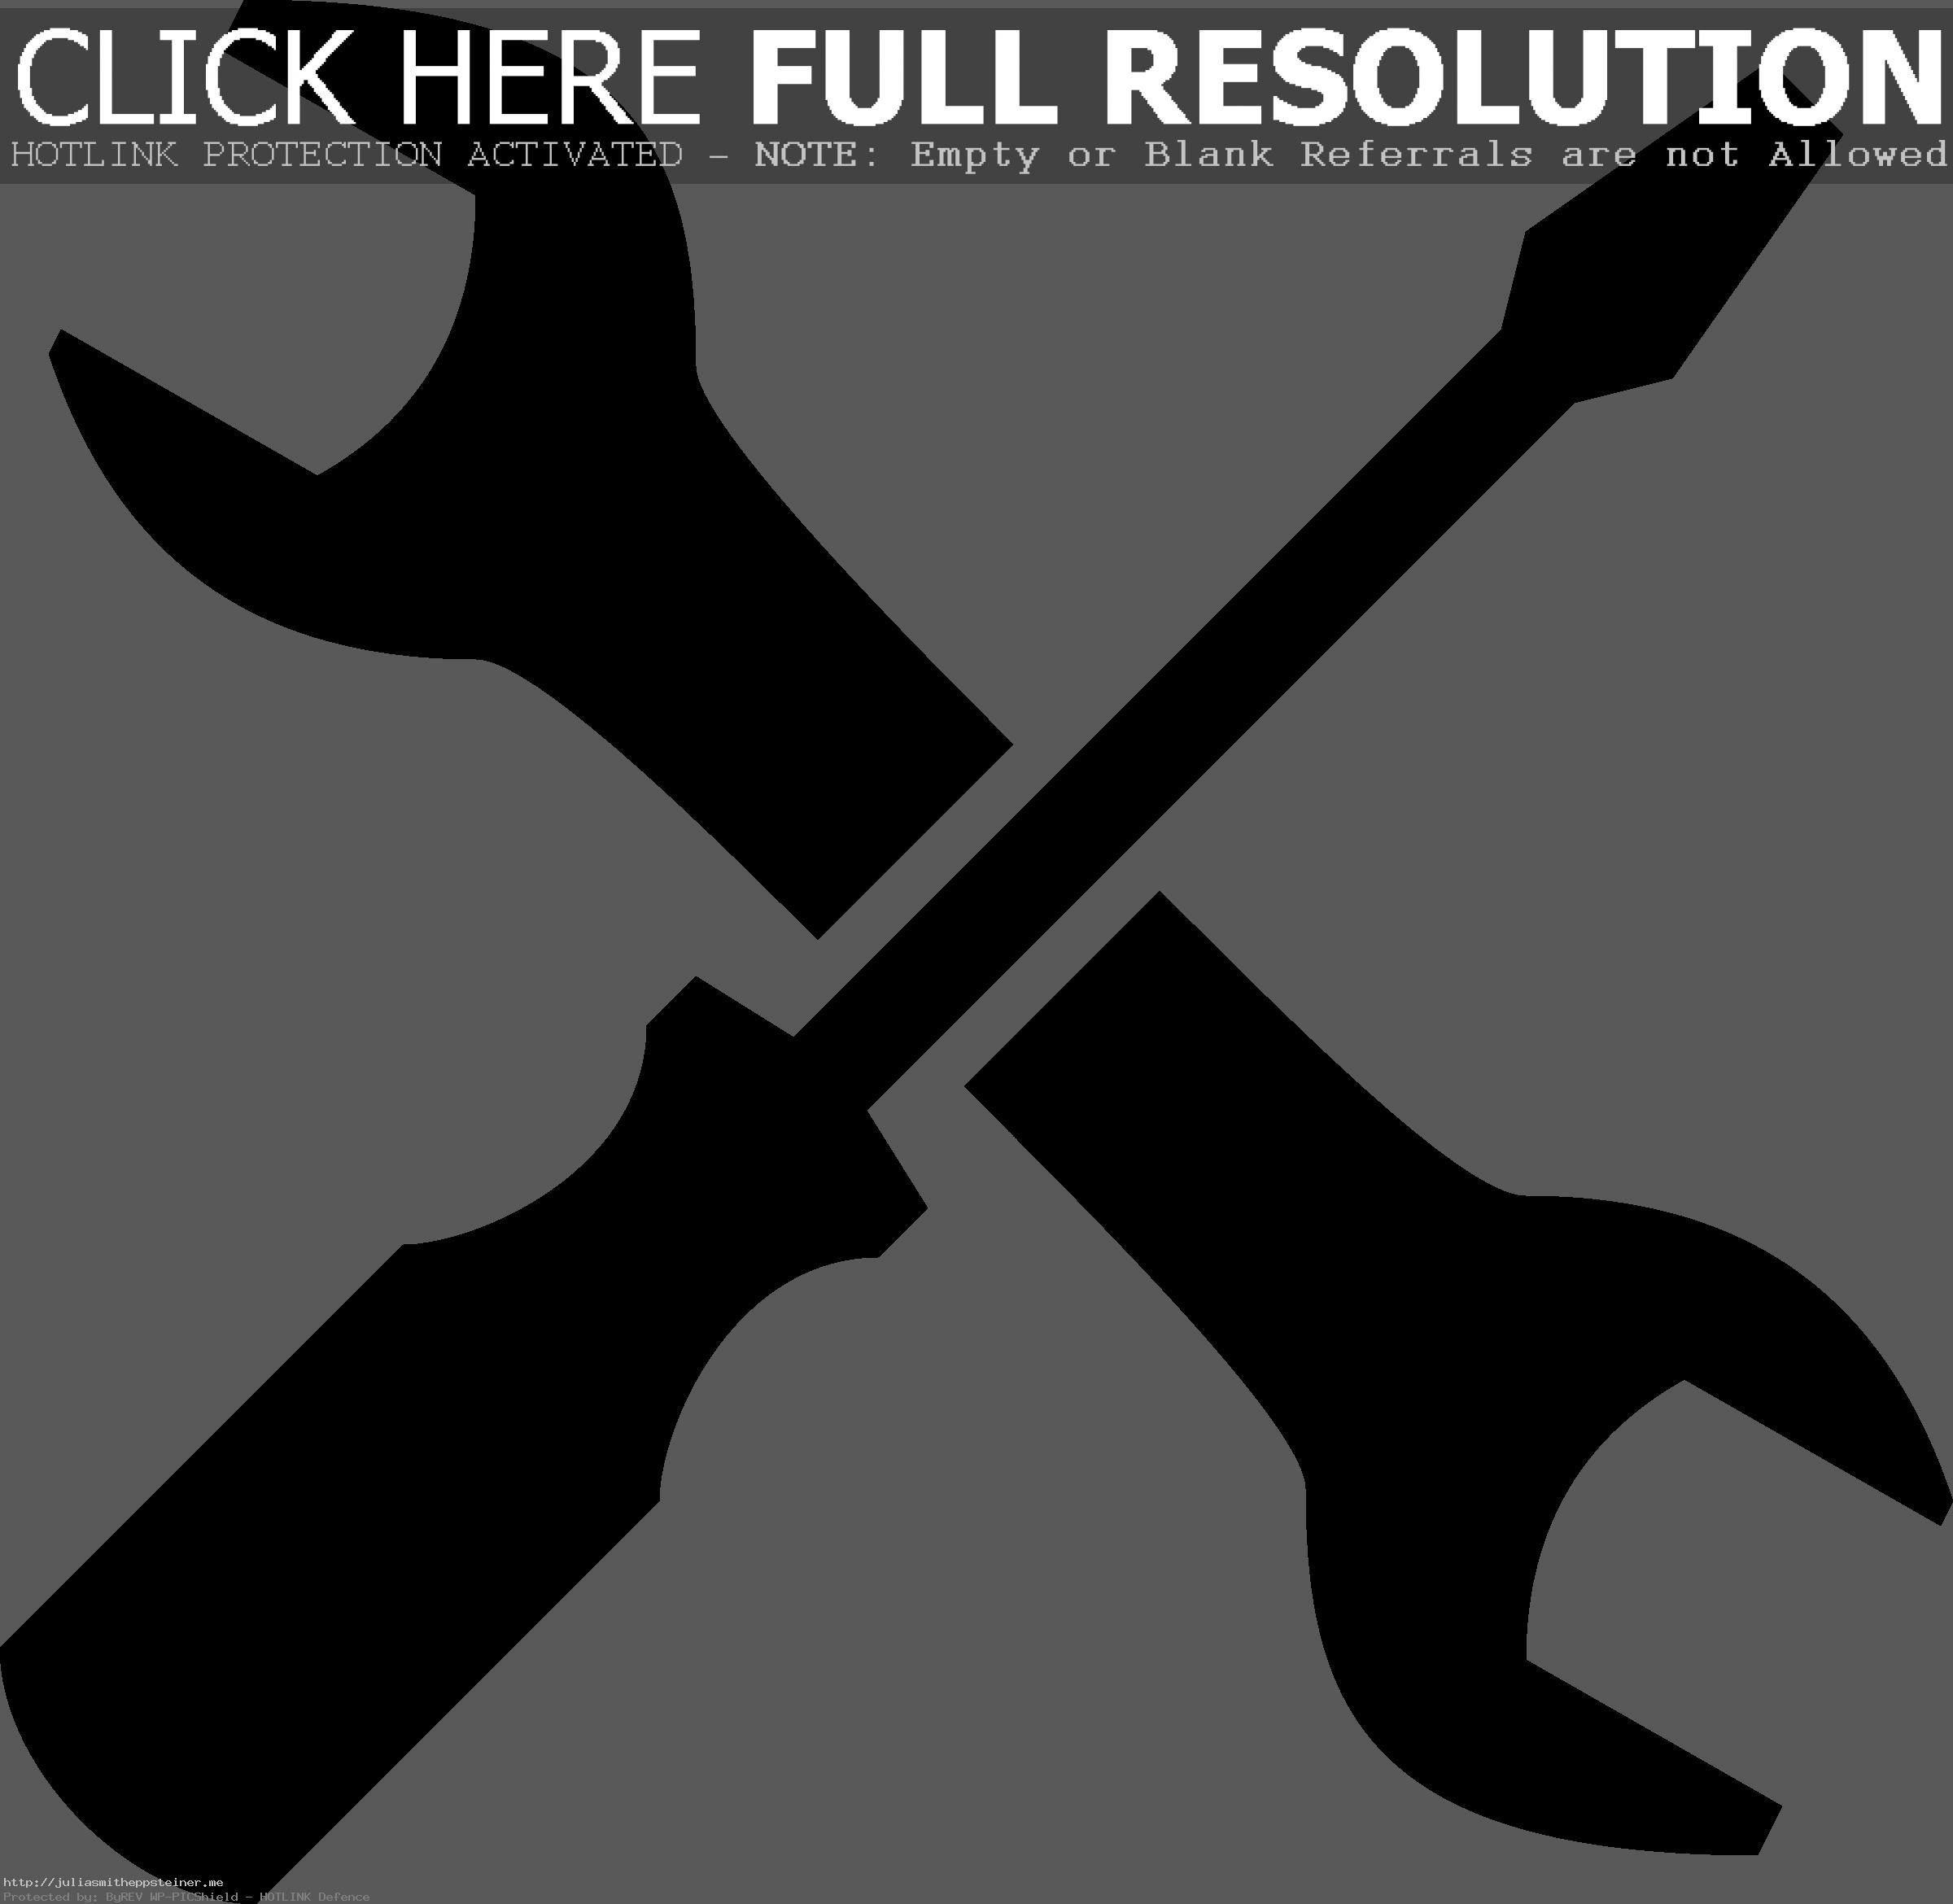 Download Tool Free PNG Photo Images And Clipart FreePNGImg Beauteous Tools  ClipartLook.com 